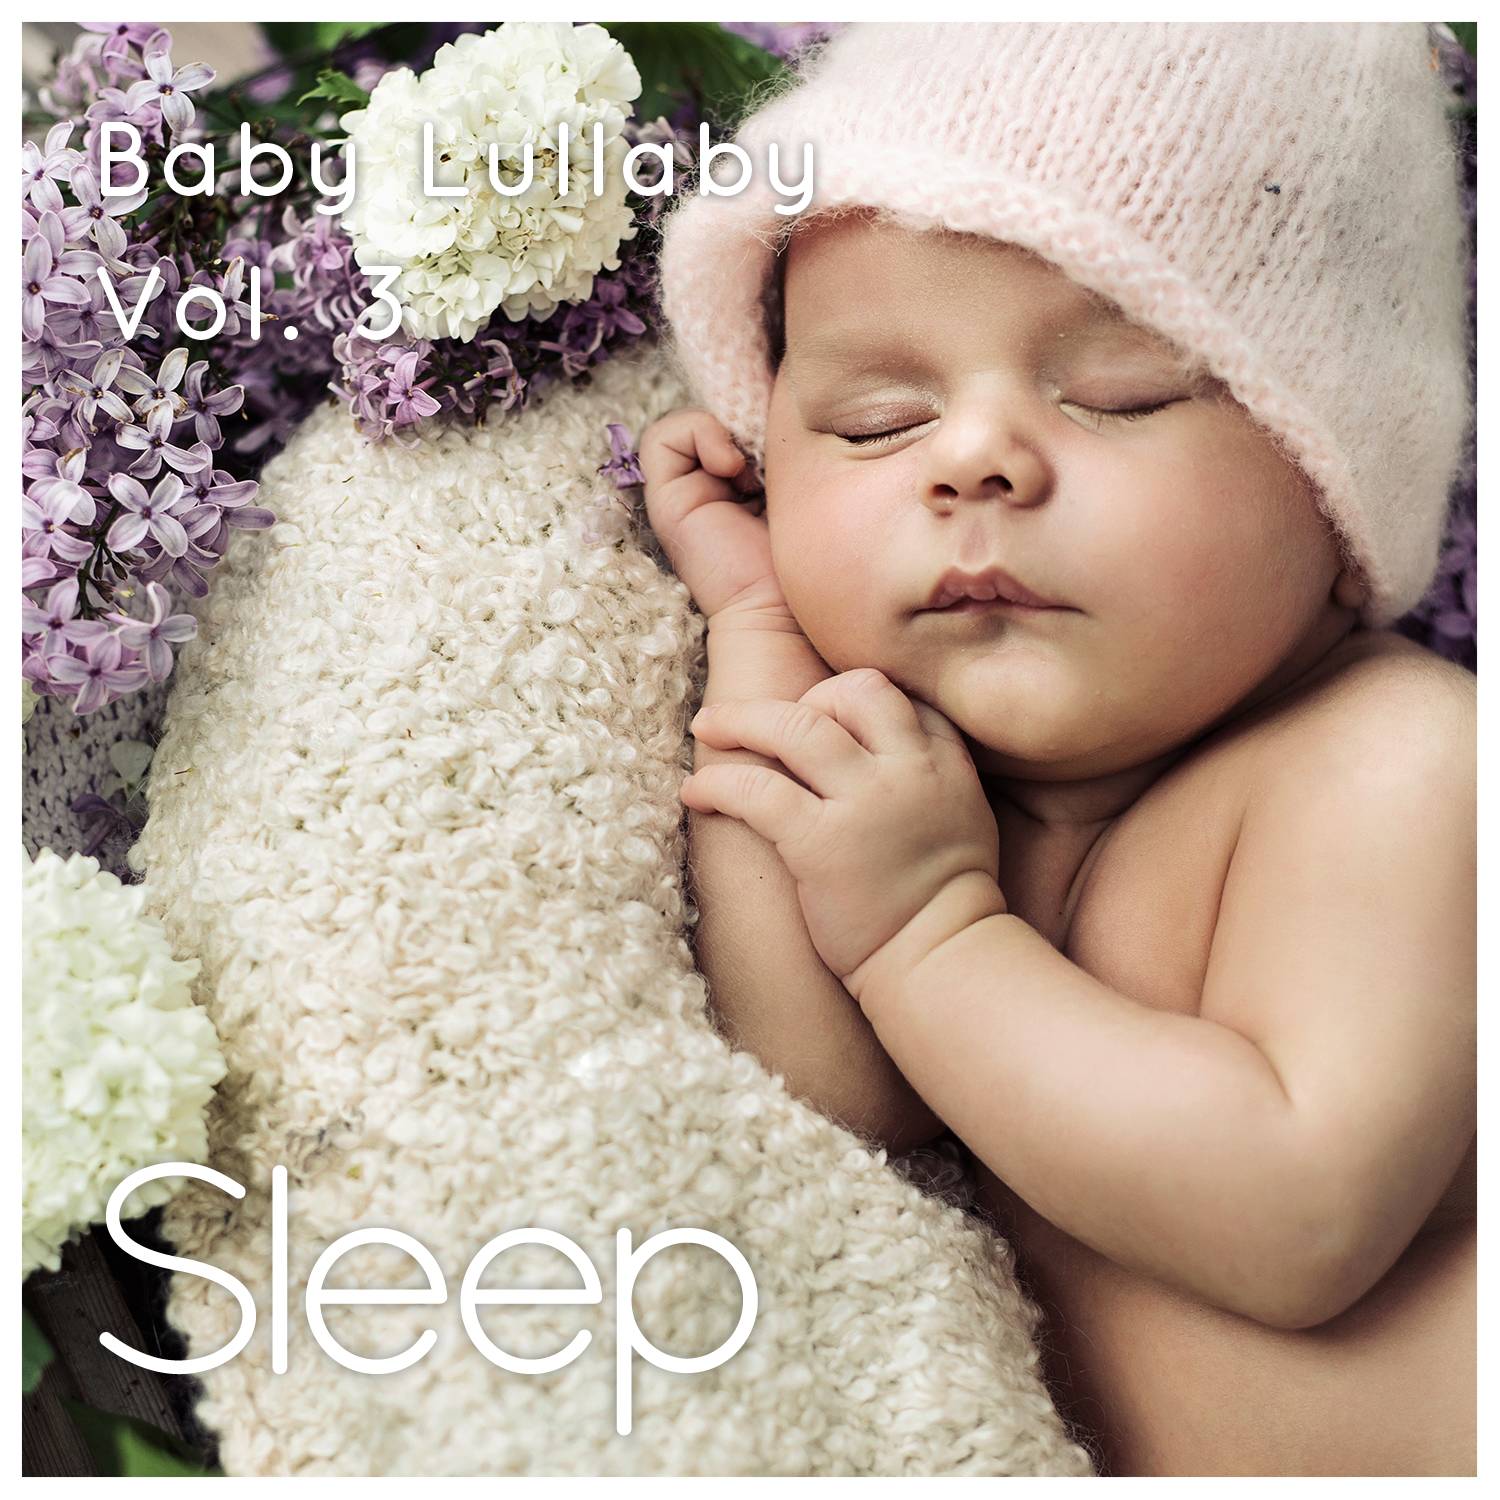 Baby Sleep Ambient Lullaby, Pt. 12